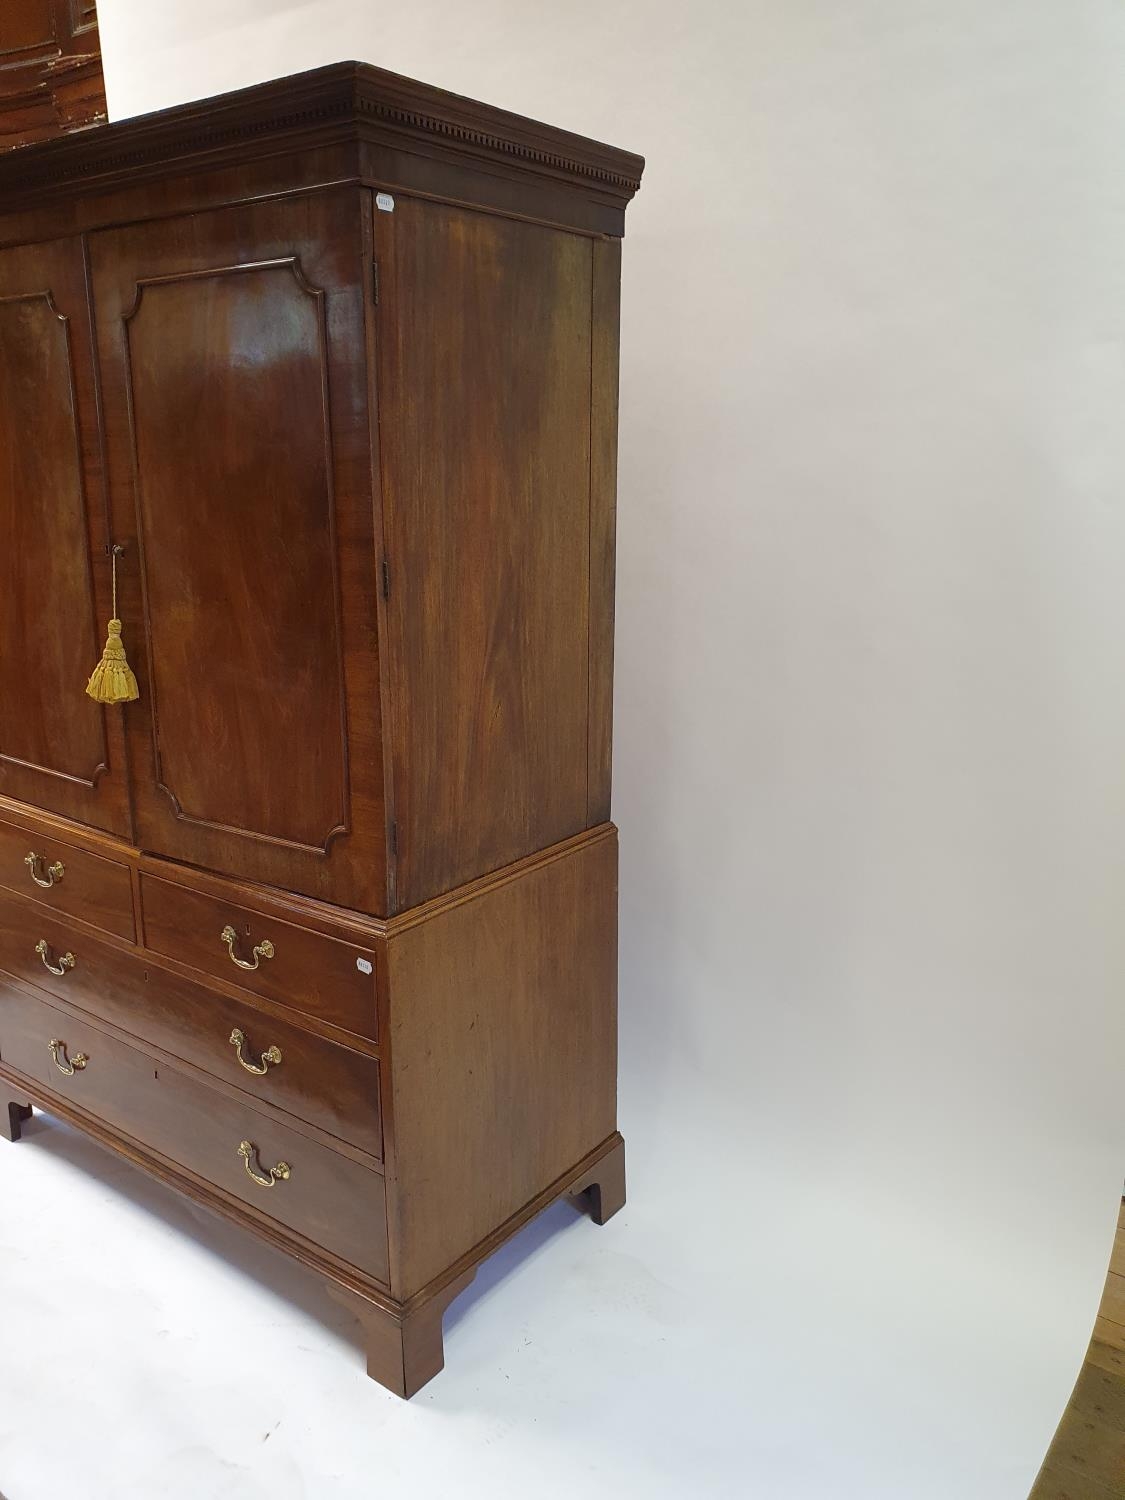 A 19th century mahogany linen press, the top with two cupboard doors, to reveal slides, on a base - Image 4 of 4